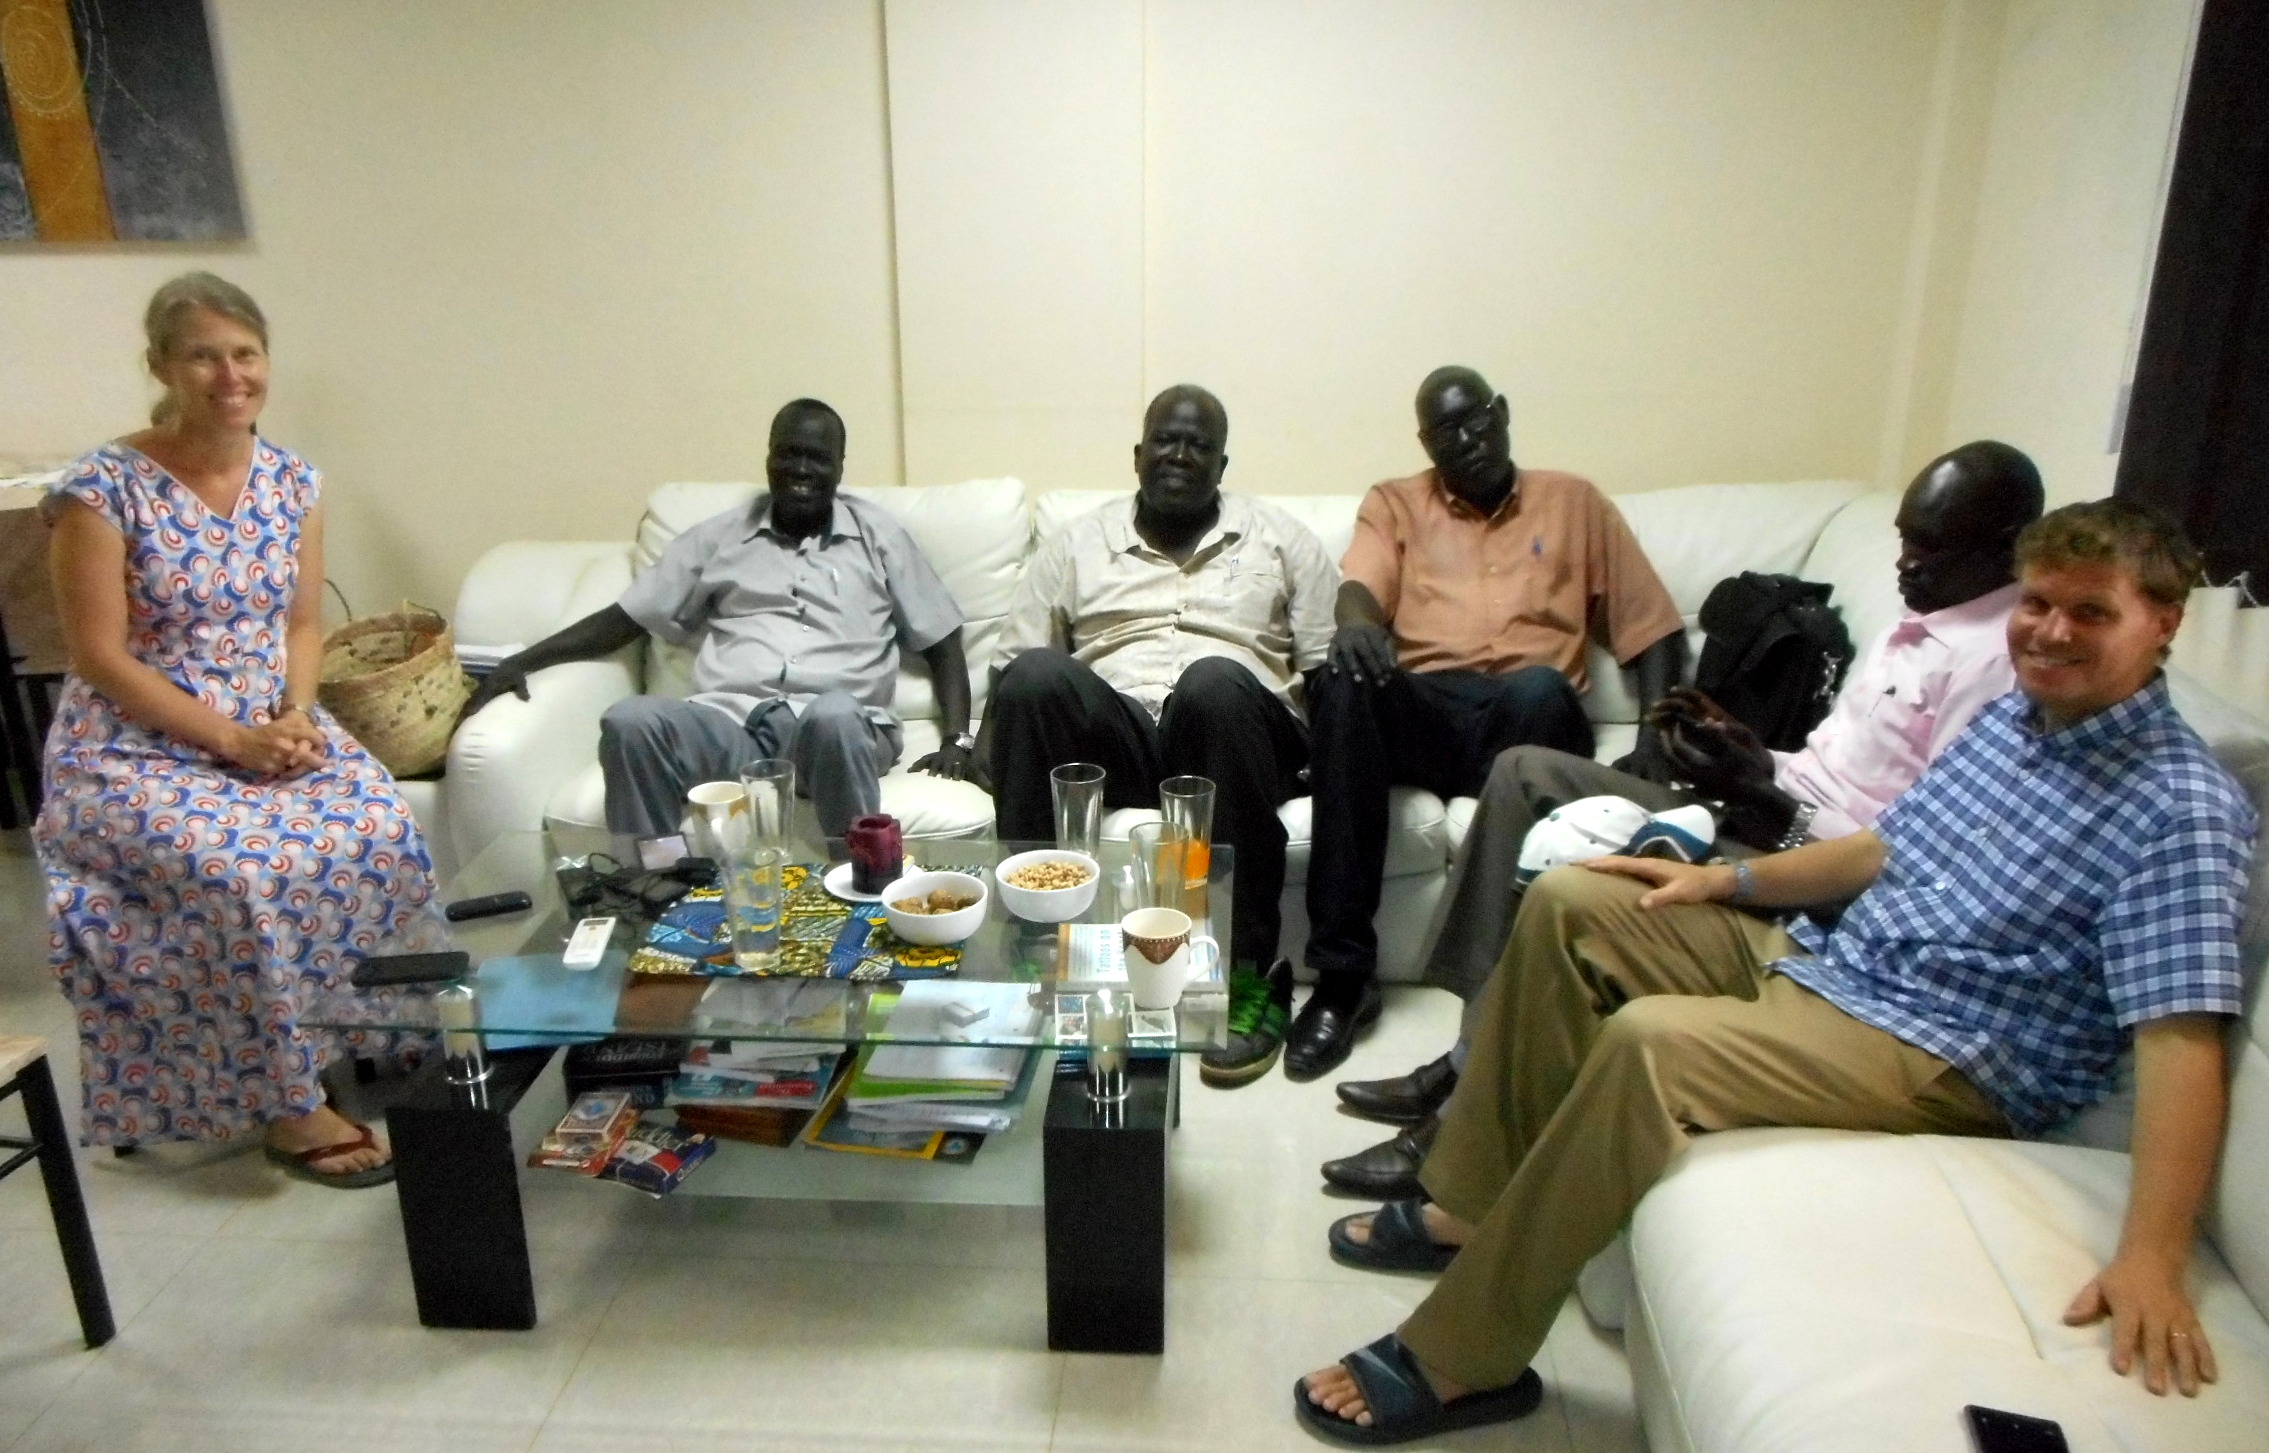 Faculty from Nile Theological College pay us a pastoral visit in our home, in the midst of Bob’s struggle with the Epstein-Barr virus.